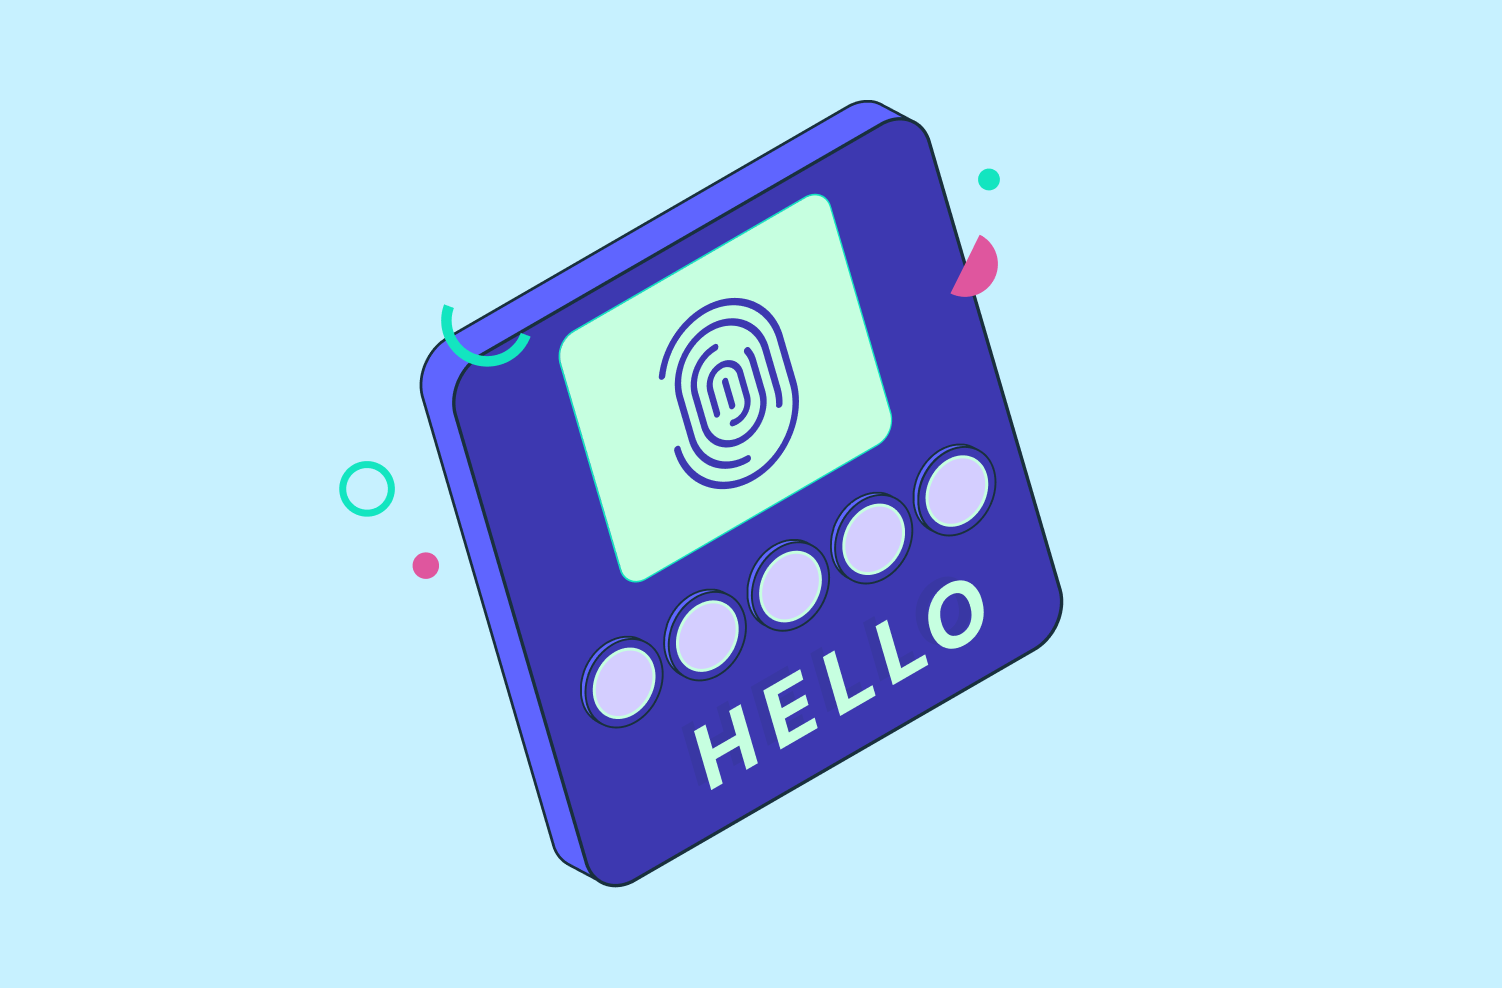 an abstracted illustration of a biometric reader